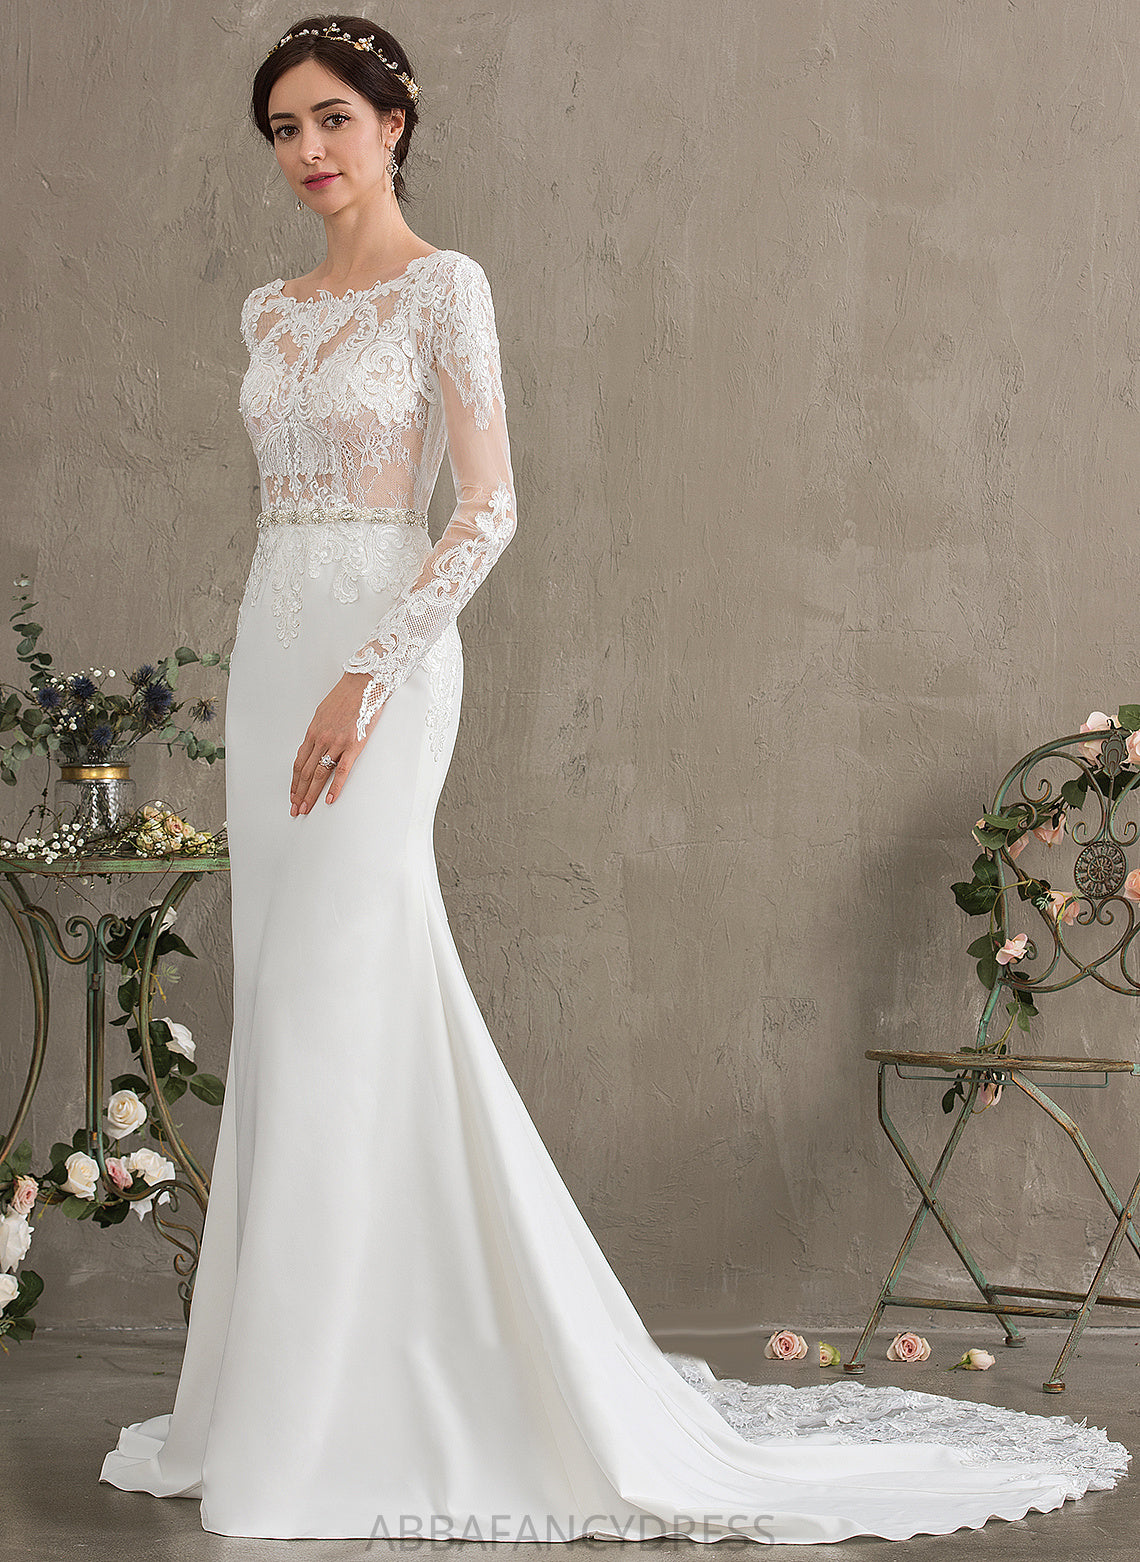 Stretch Chapel With Scoop Dress Wedding Dresses Lace Sequins Neck Wedding Train Crepe Shannon Trumpet/Mermaid Beading